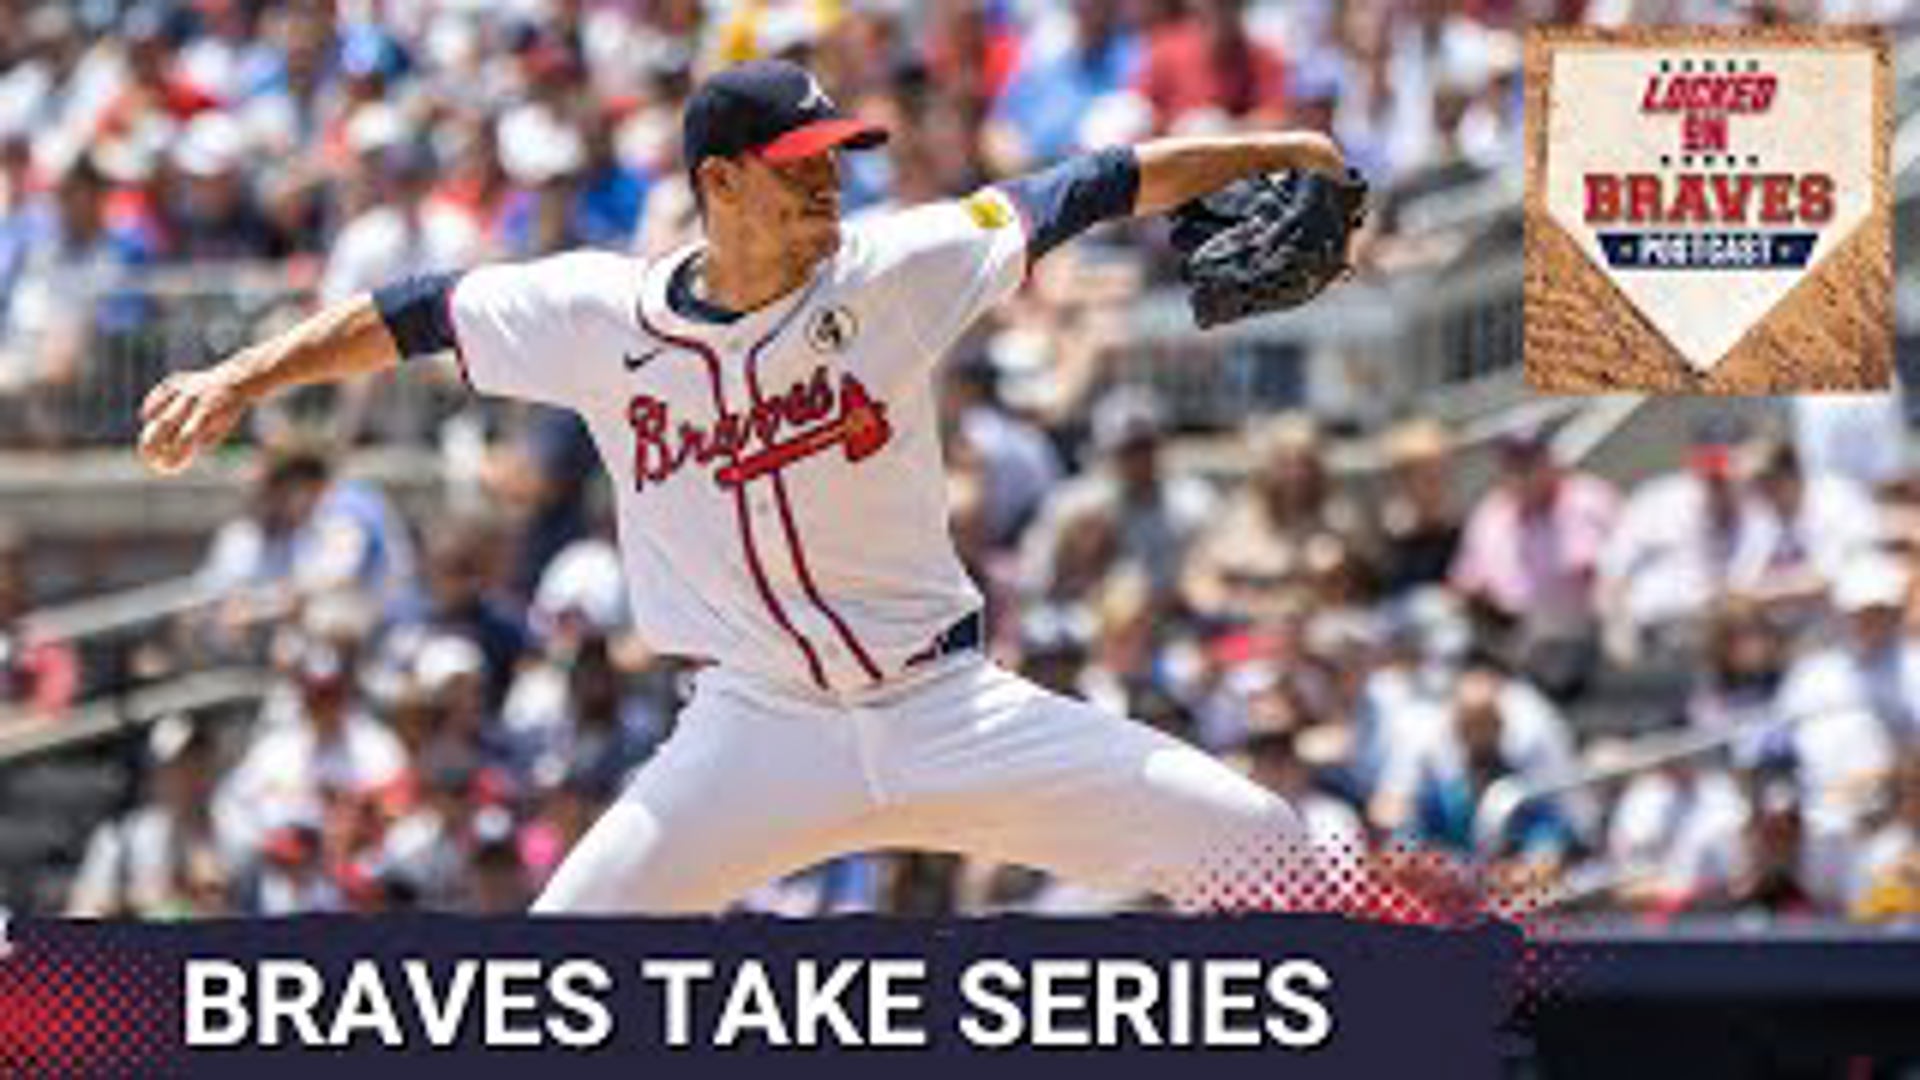 The Atlanta Braves got a well-pitched game and utilized some timely hitting to claim a 3-1 victory on Sunday and take the weekend series from the Oakland Athletics.